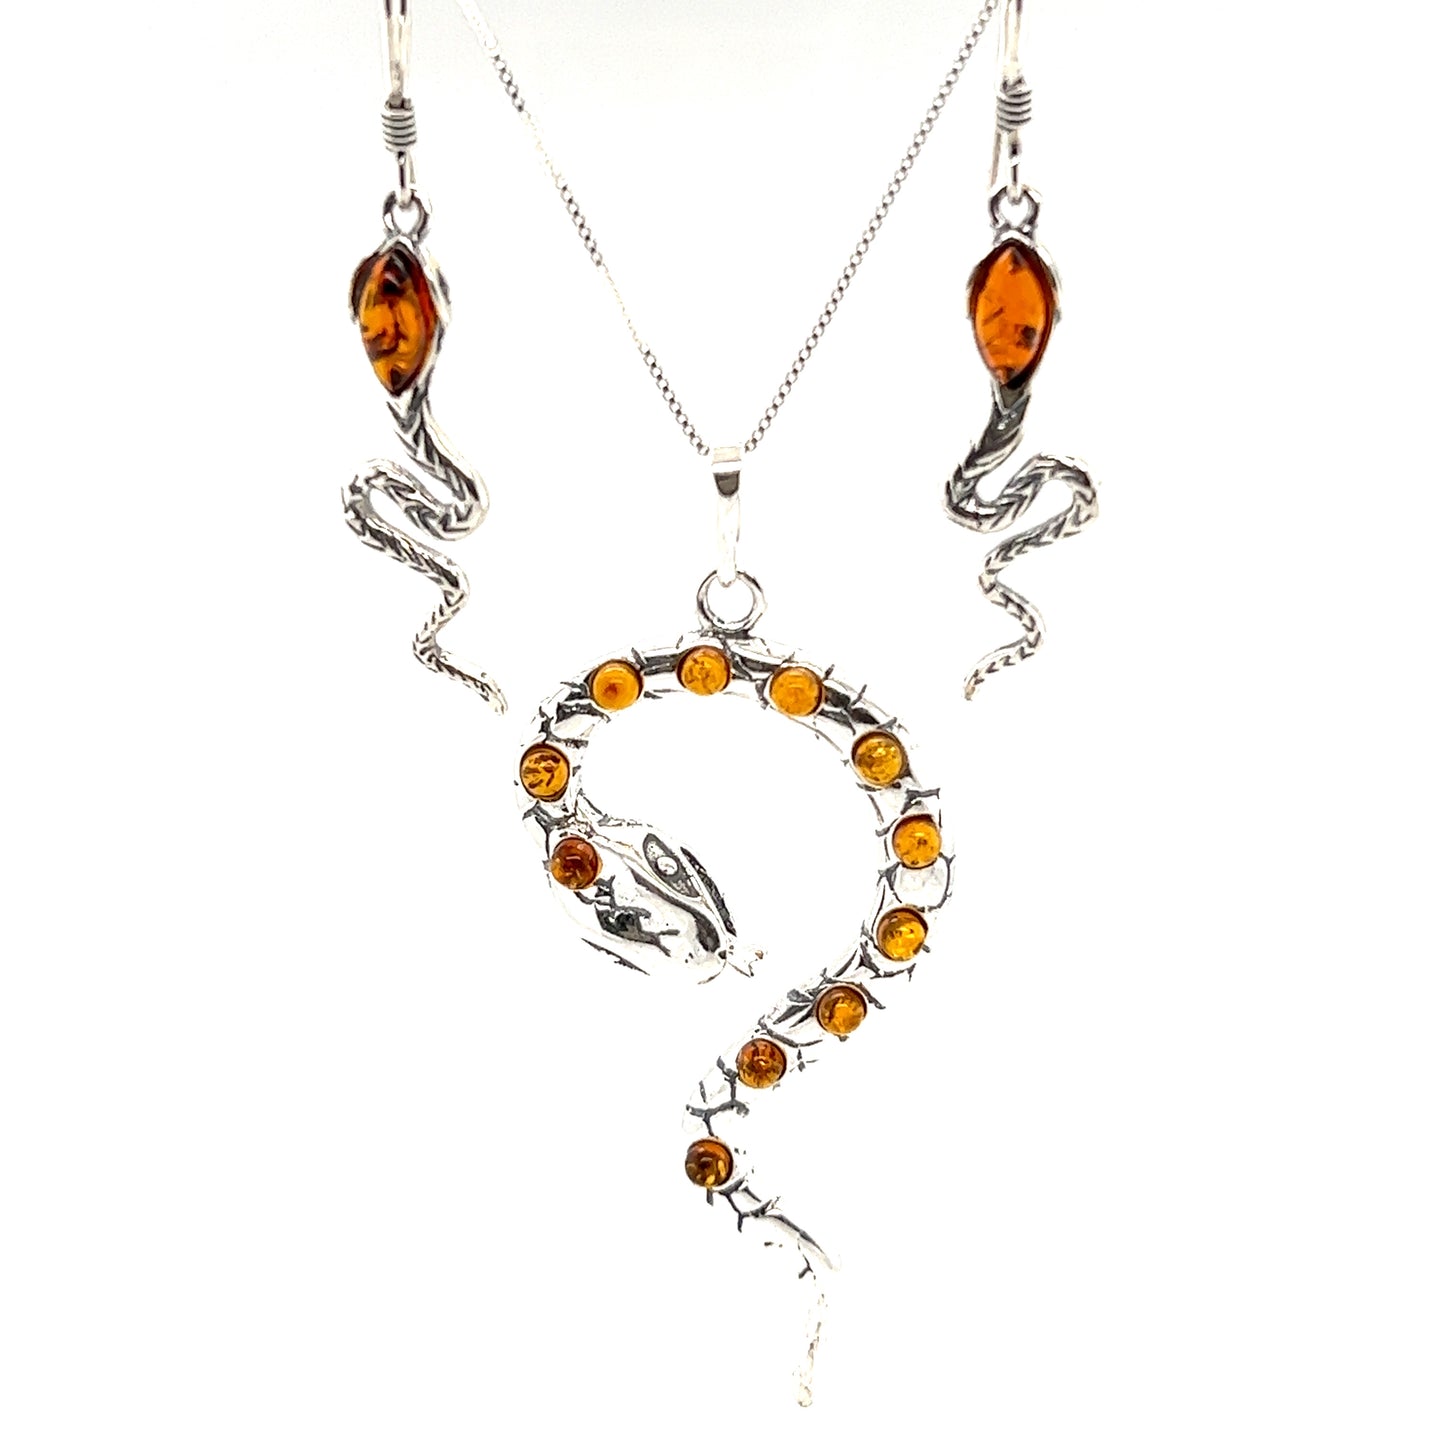 Mesmerizing Super Silver deep cognac amber necklace and earring set featuring a Large Amber Snake pendant.